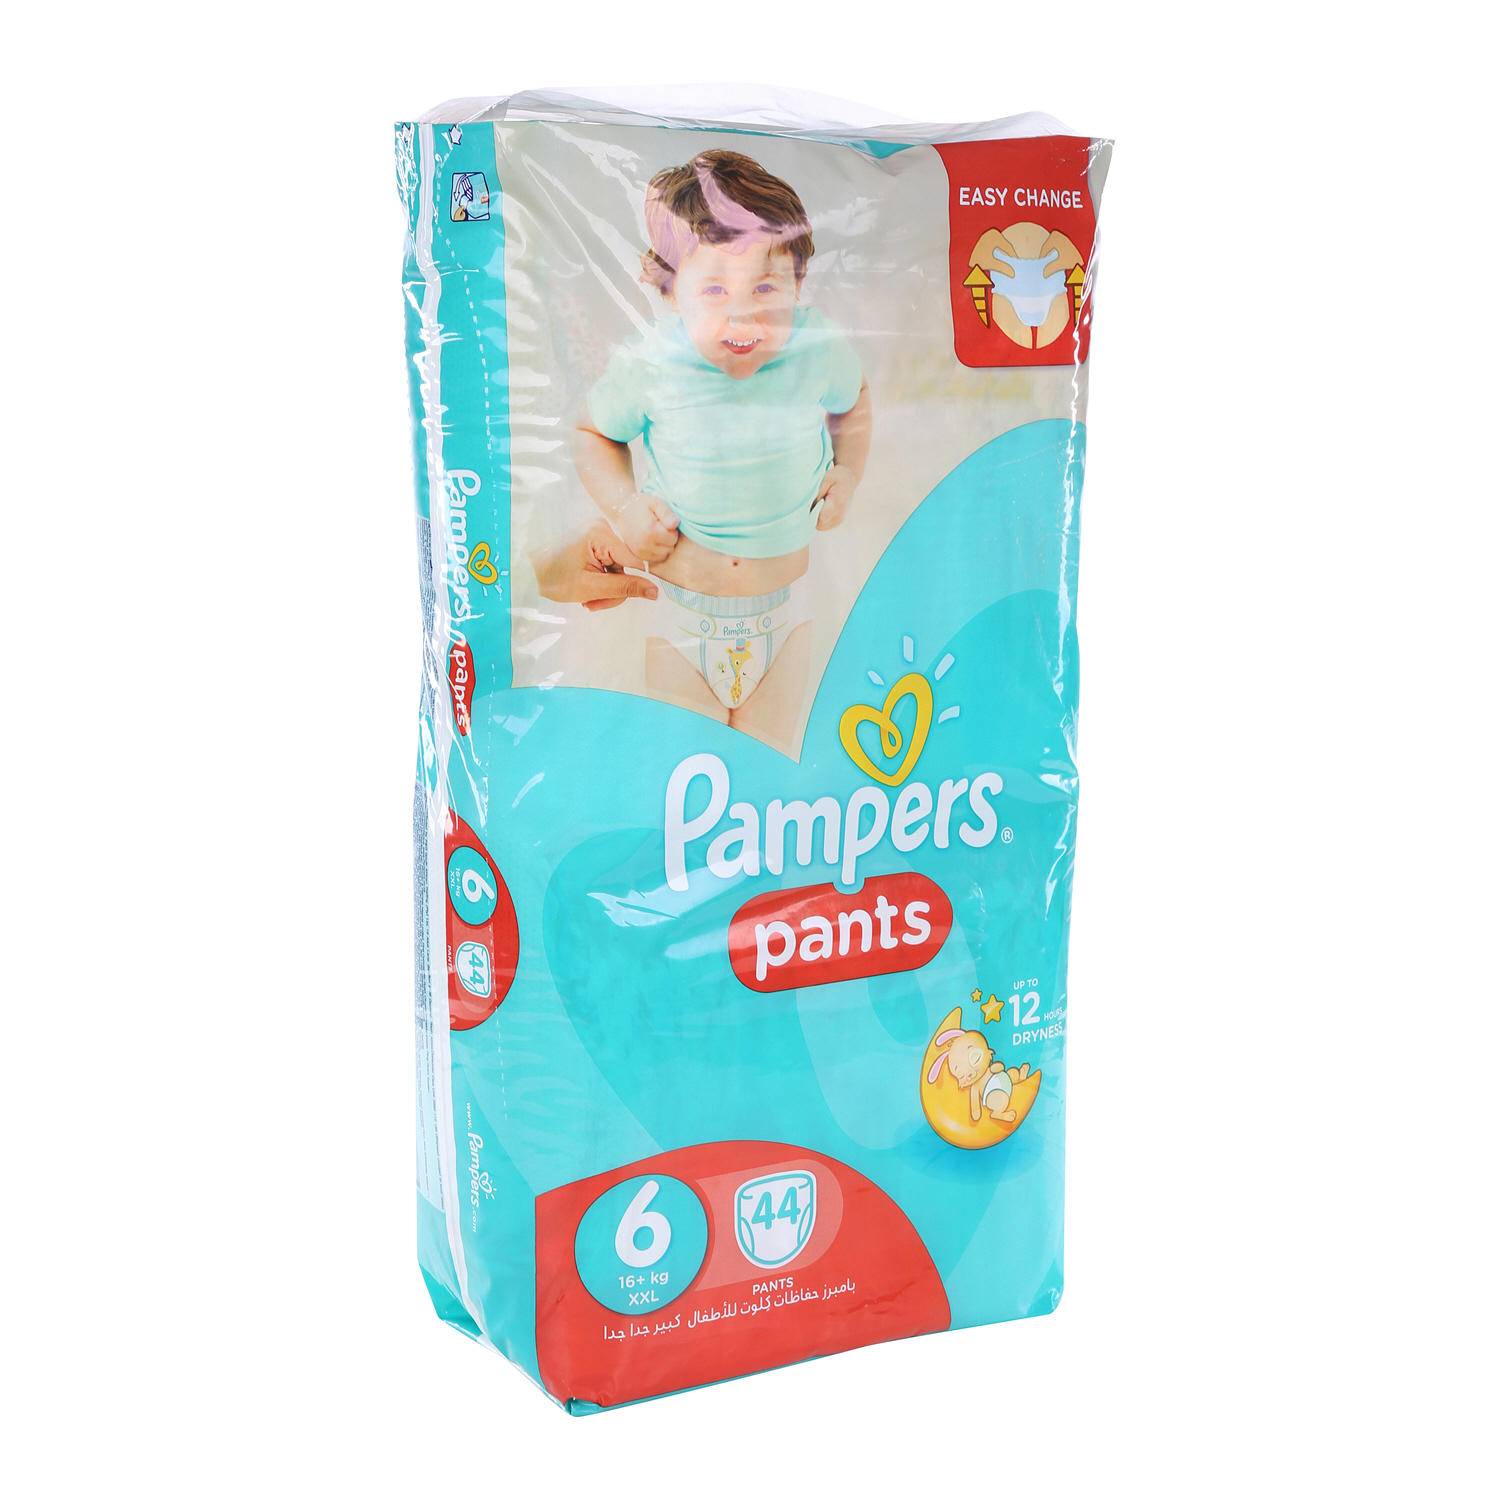 Pampers Pants Size 6 Japanese Pack 44 Pieces